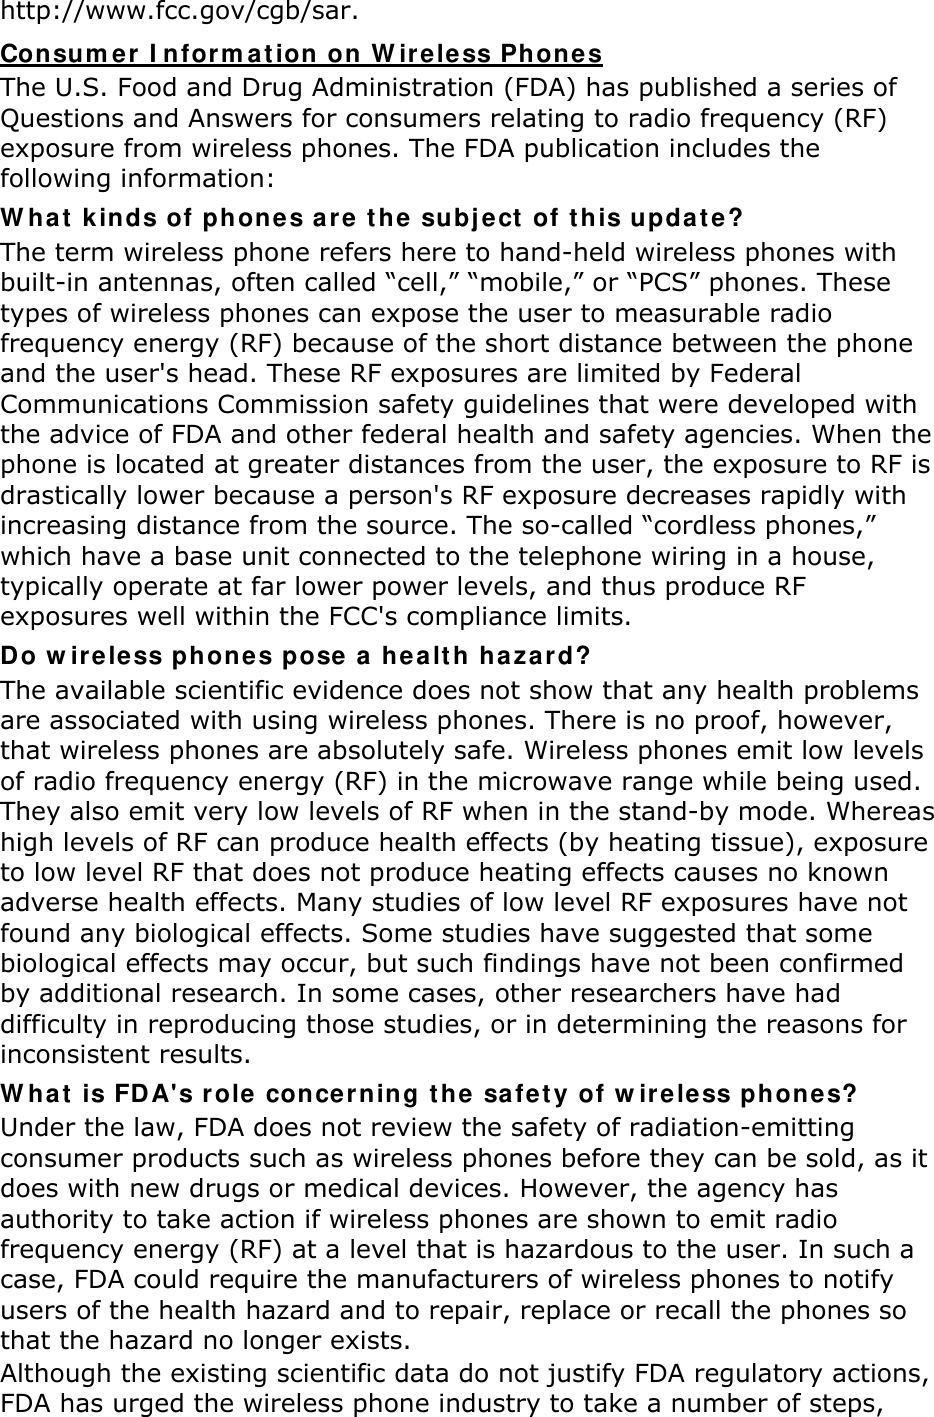 http://www.fcc.gov/cgb/sar. Consum er I nfor m a t ion on W ireless Phone s The U.S. Food and Drug Administration (FDA) has published a series of Questions and Answers for consumers relating to radio frequency (RF) exposure from wireless phones. The FDA publication includes the following information: W hat k inds of phones are  the subj e ct  of t his update? The term wireless phone refers here to hand-held wireless phones with built-in antennas, often called “cell,” “mobile,” or “PCS” phones. These types of wireless phones can expose the user to measurable radio frequency energy (RF) because of the short distance between the phone and the user&apos;s head. These RF exposures are limited by Federal Communications Commission safety guidelines that were developed with the advice of FDA and other federal health and safety agencies. When the phone is located at greater distances from the user, the exposure to RF is drastically lower because a person&apos;s RF exposure decreases rapidly with increasing distance from the source. The so-called “cordless phones,” which have a base unit connected to the telephone wiring in a house, typically operate at far lower power levels, and thus produce RF exposures well within the FCC&apos;s compliance limits. Do w ireless phone s pose  a healt h hazard? The available scientific evidence does not show that any health problems are associated with using wireless phones. There is no proof, however, that wireless phones are absolutely safe. Wireless phones emit low levels of radio frequency energy (RF) in the microwave range while being used. They also emit very low levels of RF when in the stand-by mode. Whereas high levels of RF can produce health effects (by heating tissue), exposure to low level RF that does not produce heating effects causes no known adverse health effects. Many studies of low level RF exposures have not found any biological effects. Some studies have suggested that some biological effects may occur, but such findings have not been confirmed by additional research. In some cases, other researchers have had difficulty in reproducing those studies, or in determining the reasons for inconsistent results. W hat is FD A&apos;s role conce rning the  safet y of w ire less phones? Under the law, FDA does not review the safety of radiation-emitting consumer products such as wireless phones before they can be sold, as it does with new drugs or medical devices. However, the agency has authority to take action if wireless phones are shown to emit radio frequency energy (RF) at a level that is hazardous to the user. In such a case, FDA could require the manufacturers of wireless phones to notify users of the health hazard and to repair, replace or recall the phones so that the hazard no longer exists. Although the existing scientific data do not justify FDA regulatory actions, FDA has urged the wireless phone industry to take a number of steps, 